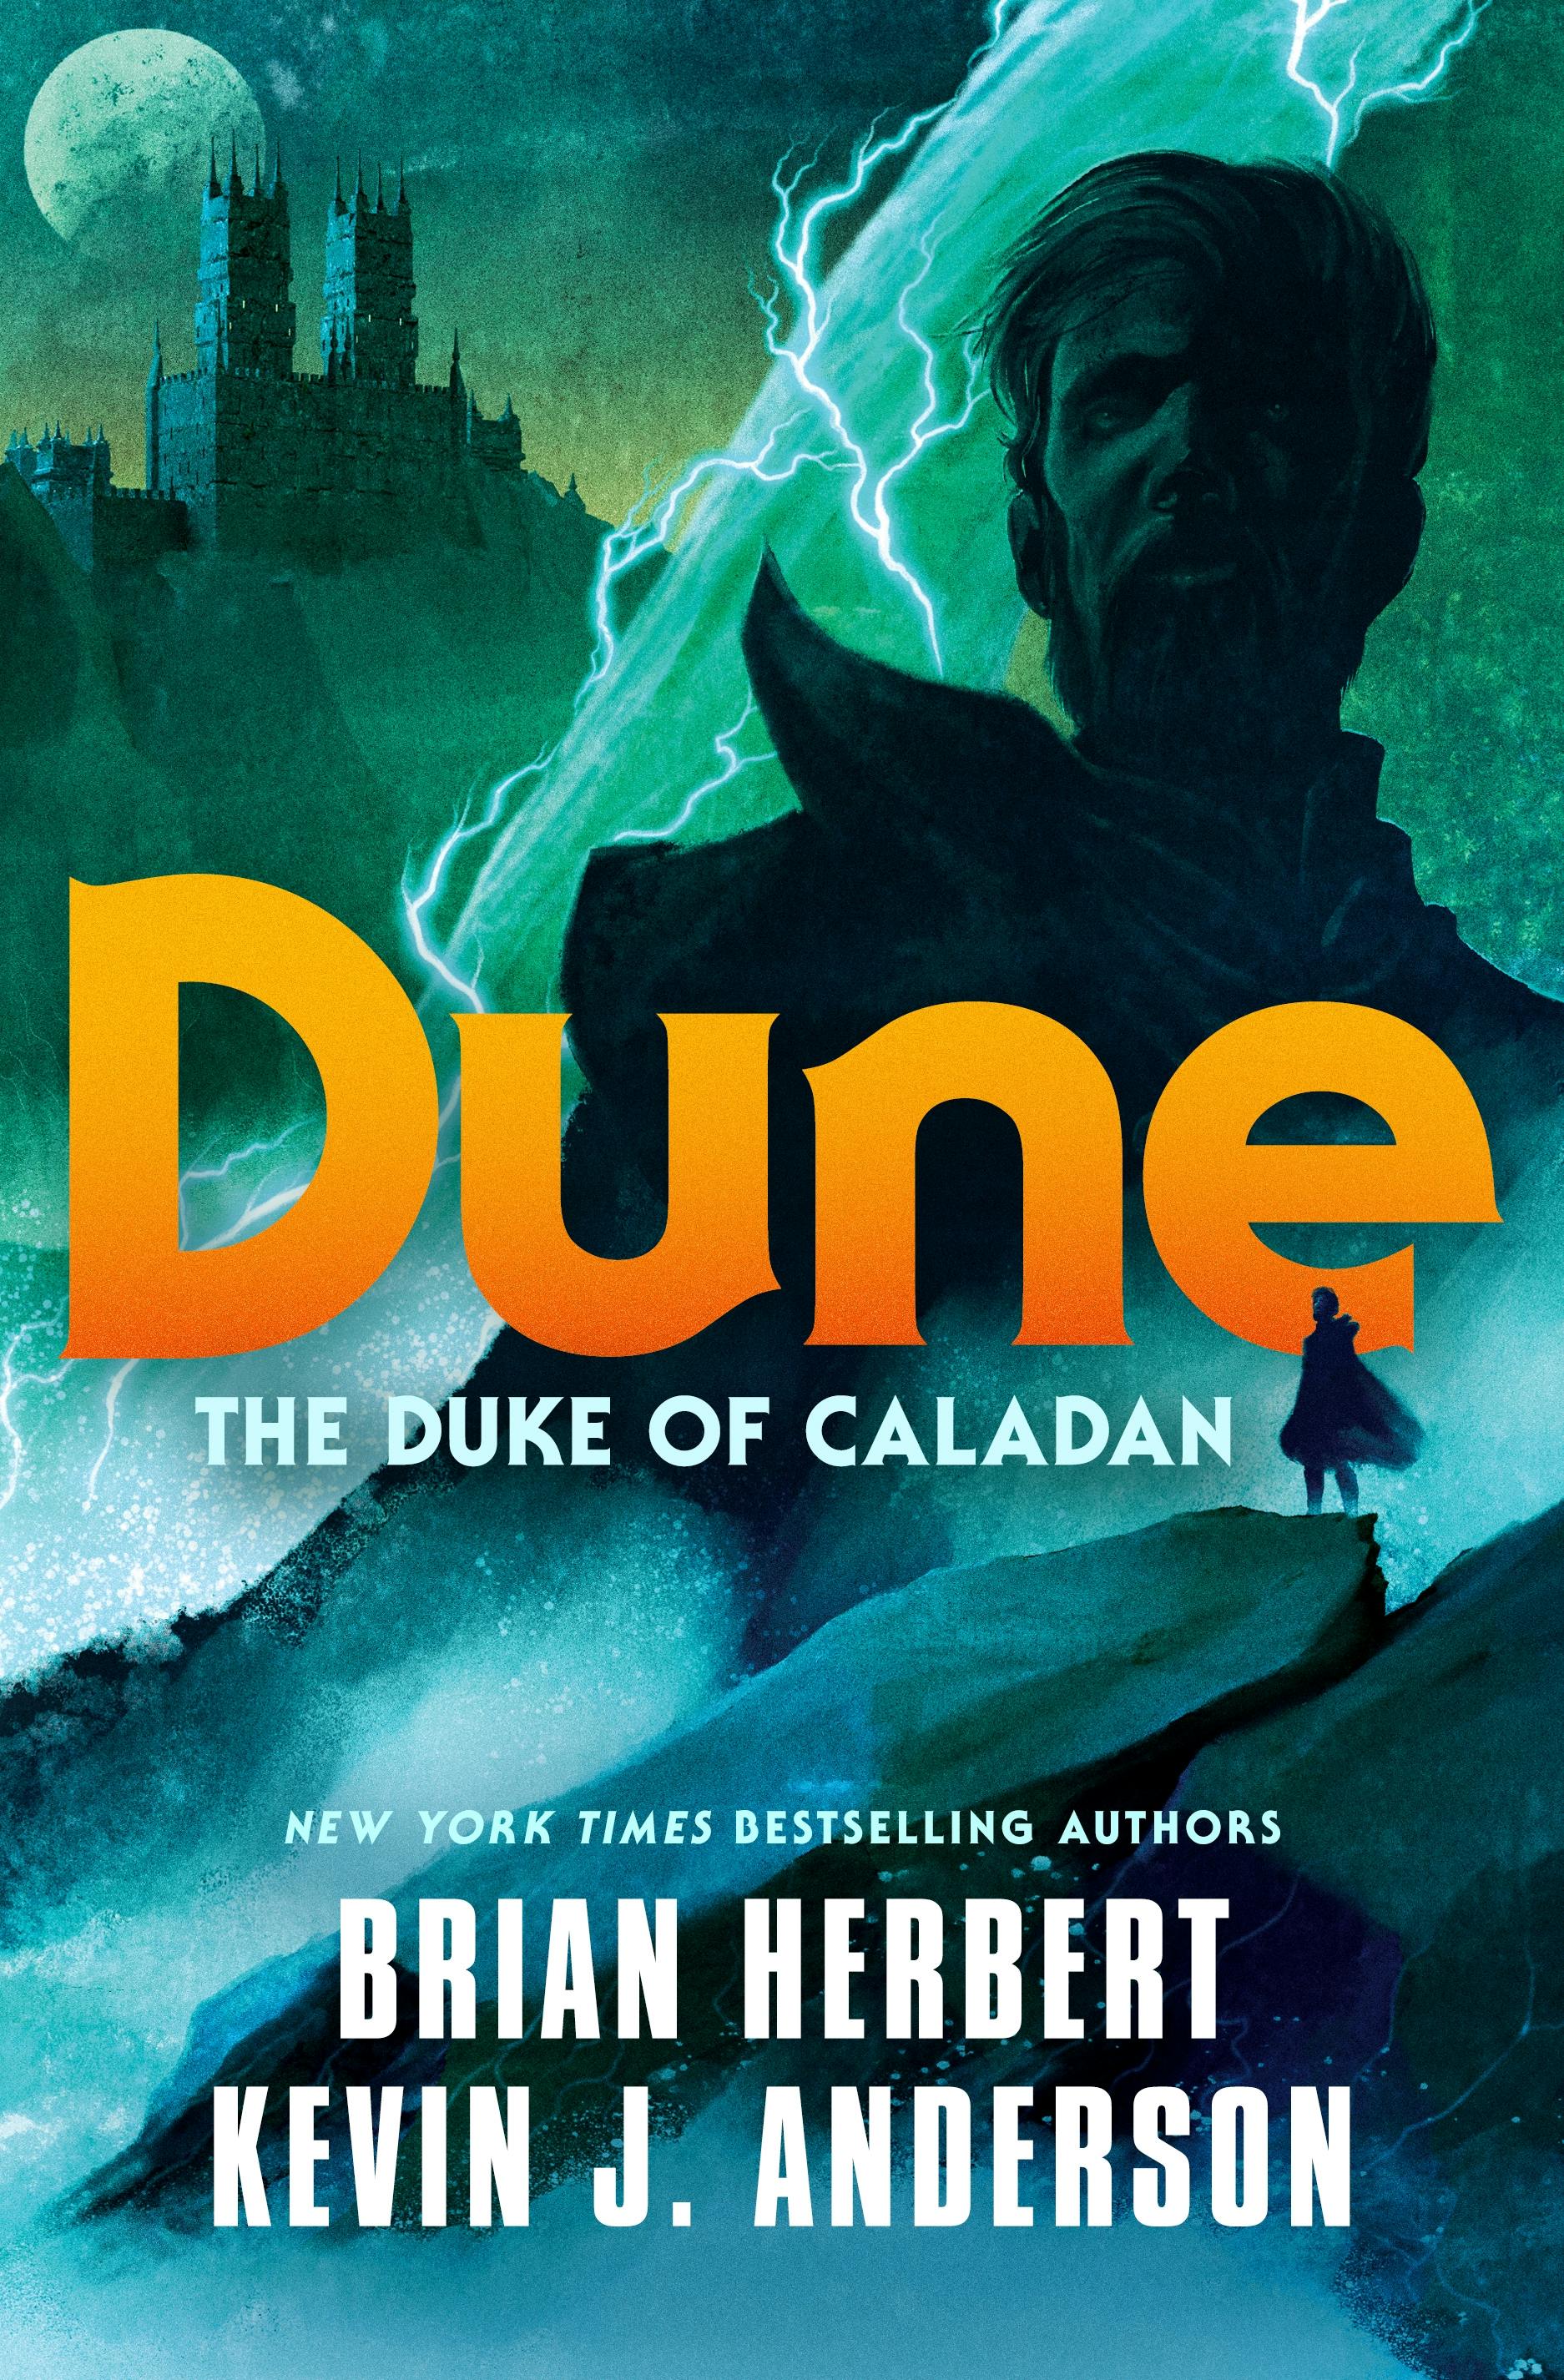 Cover for the book titled as: Dune: The Duke of Caladan